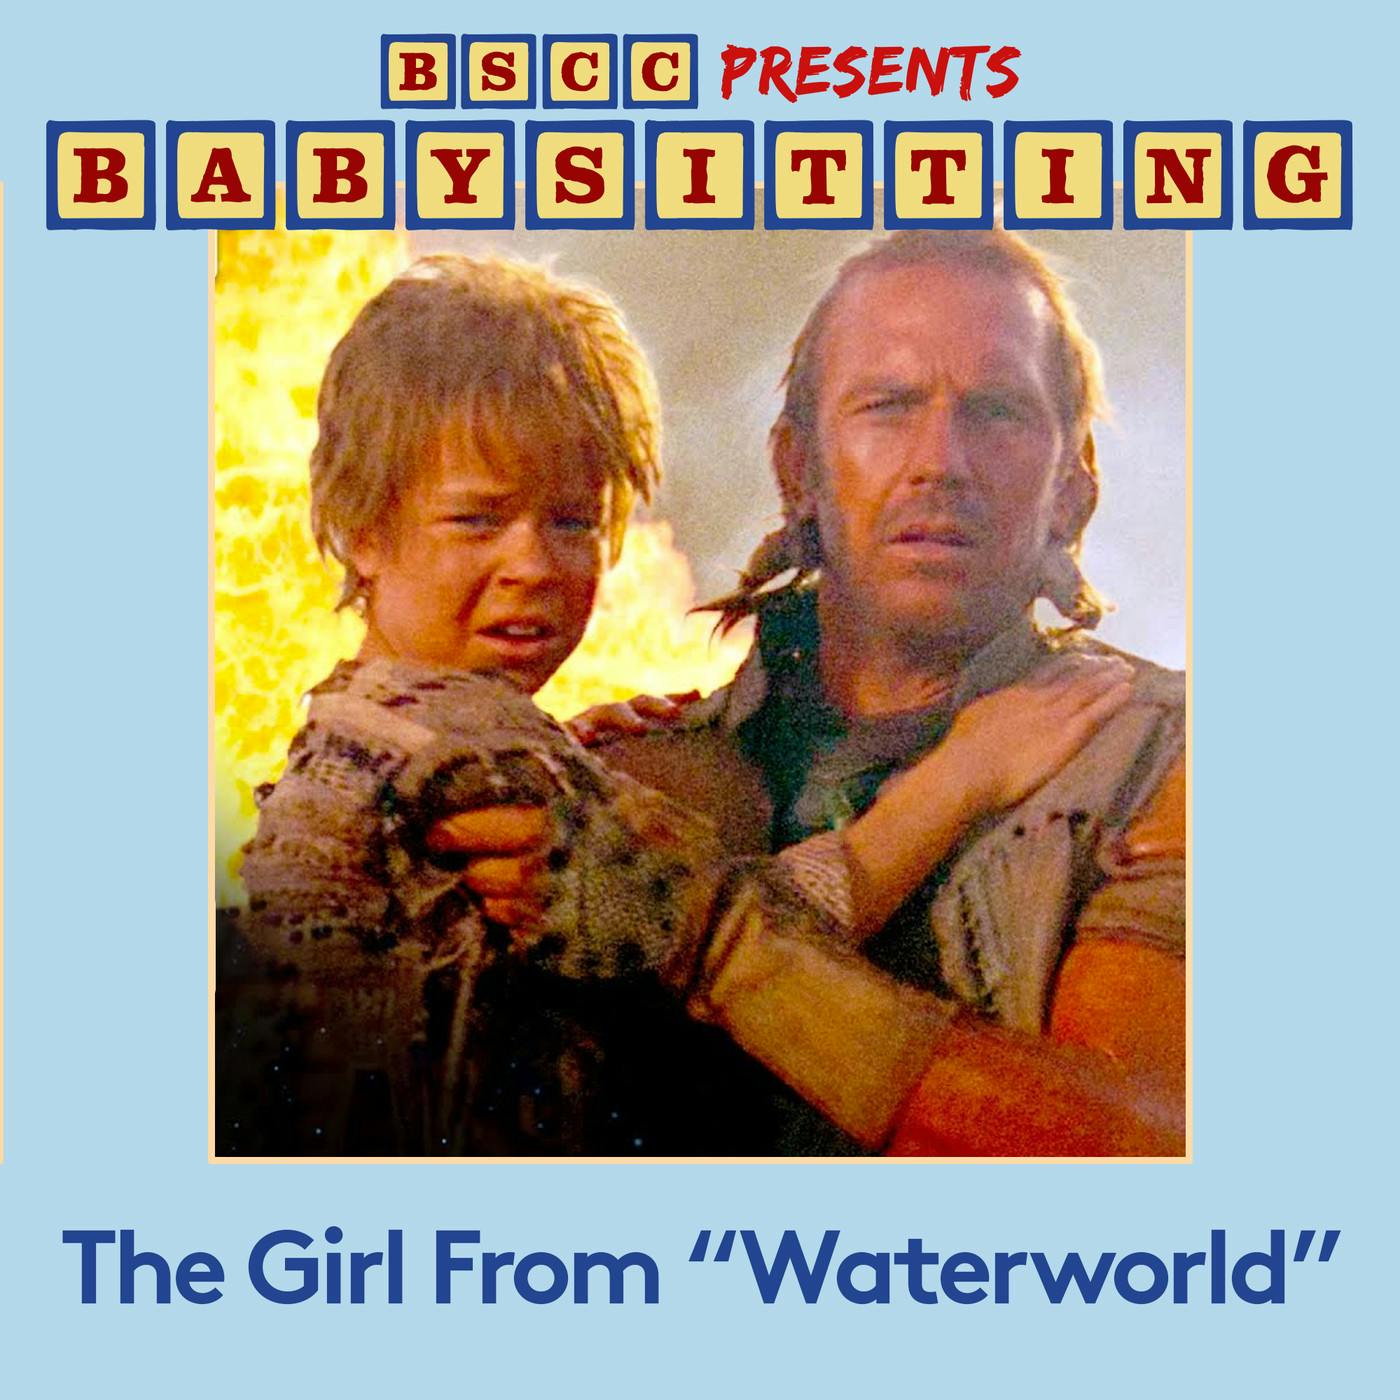 BSCC Presents: Babysitting the Girl From Waterworld